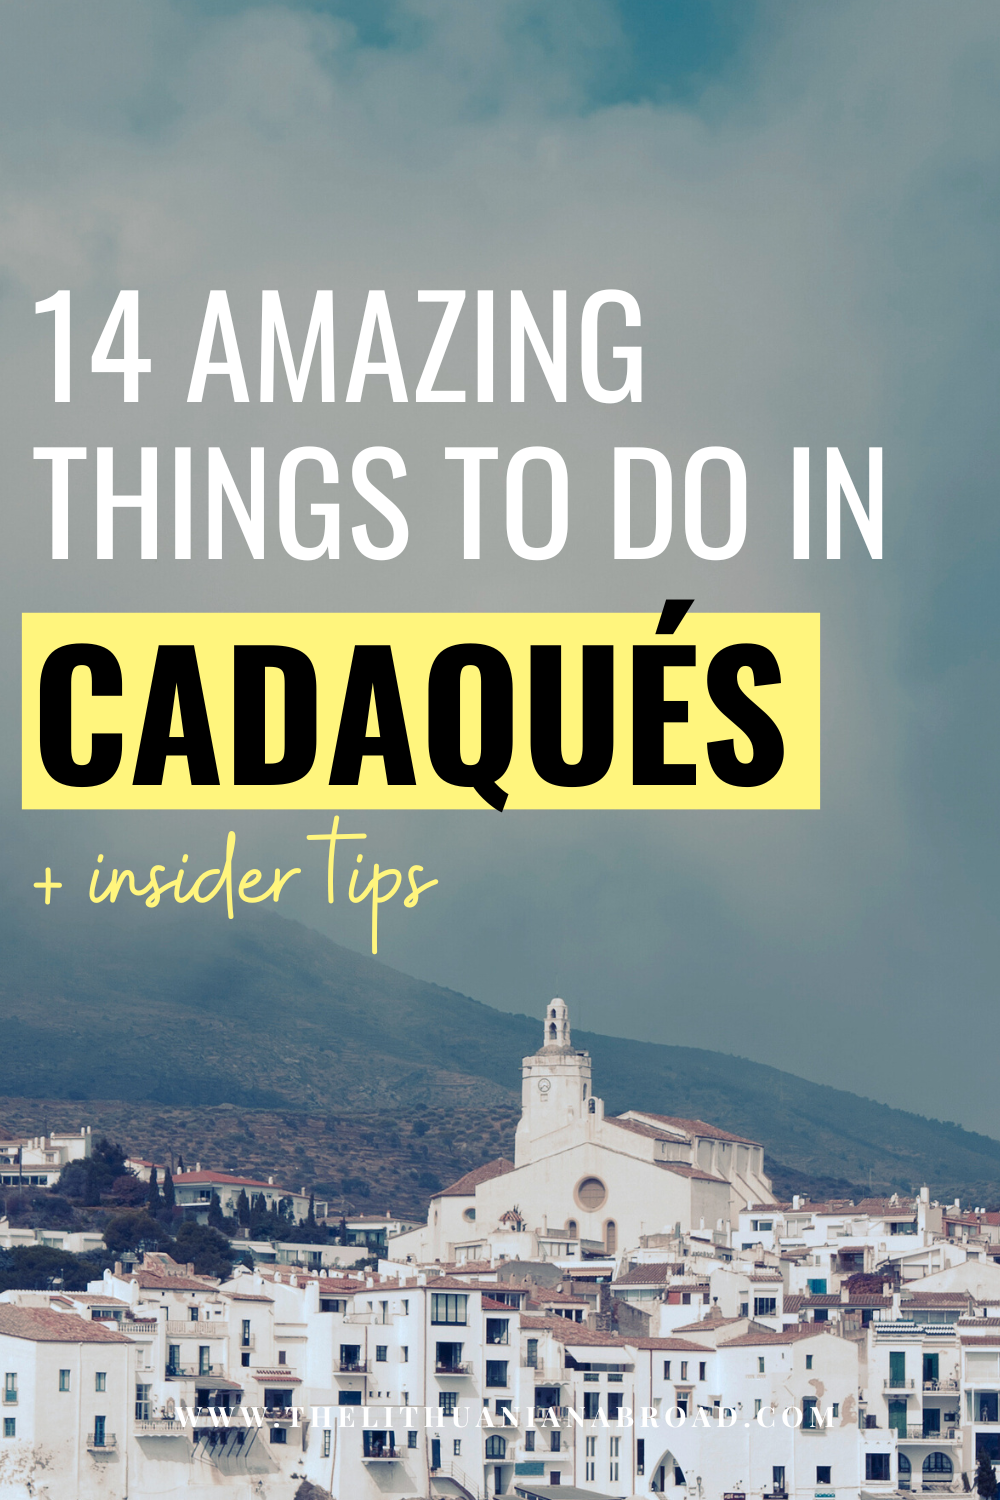 things to do in cadaques title photo